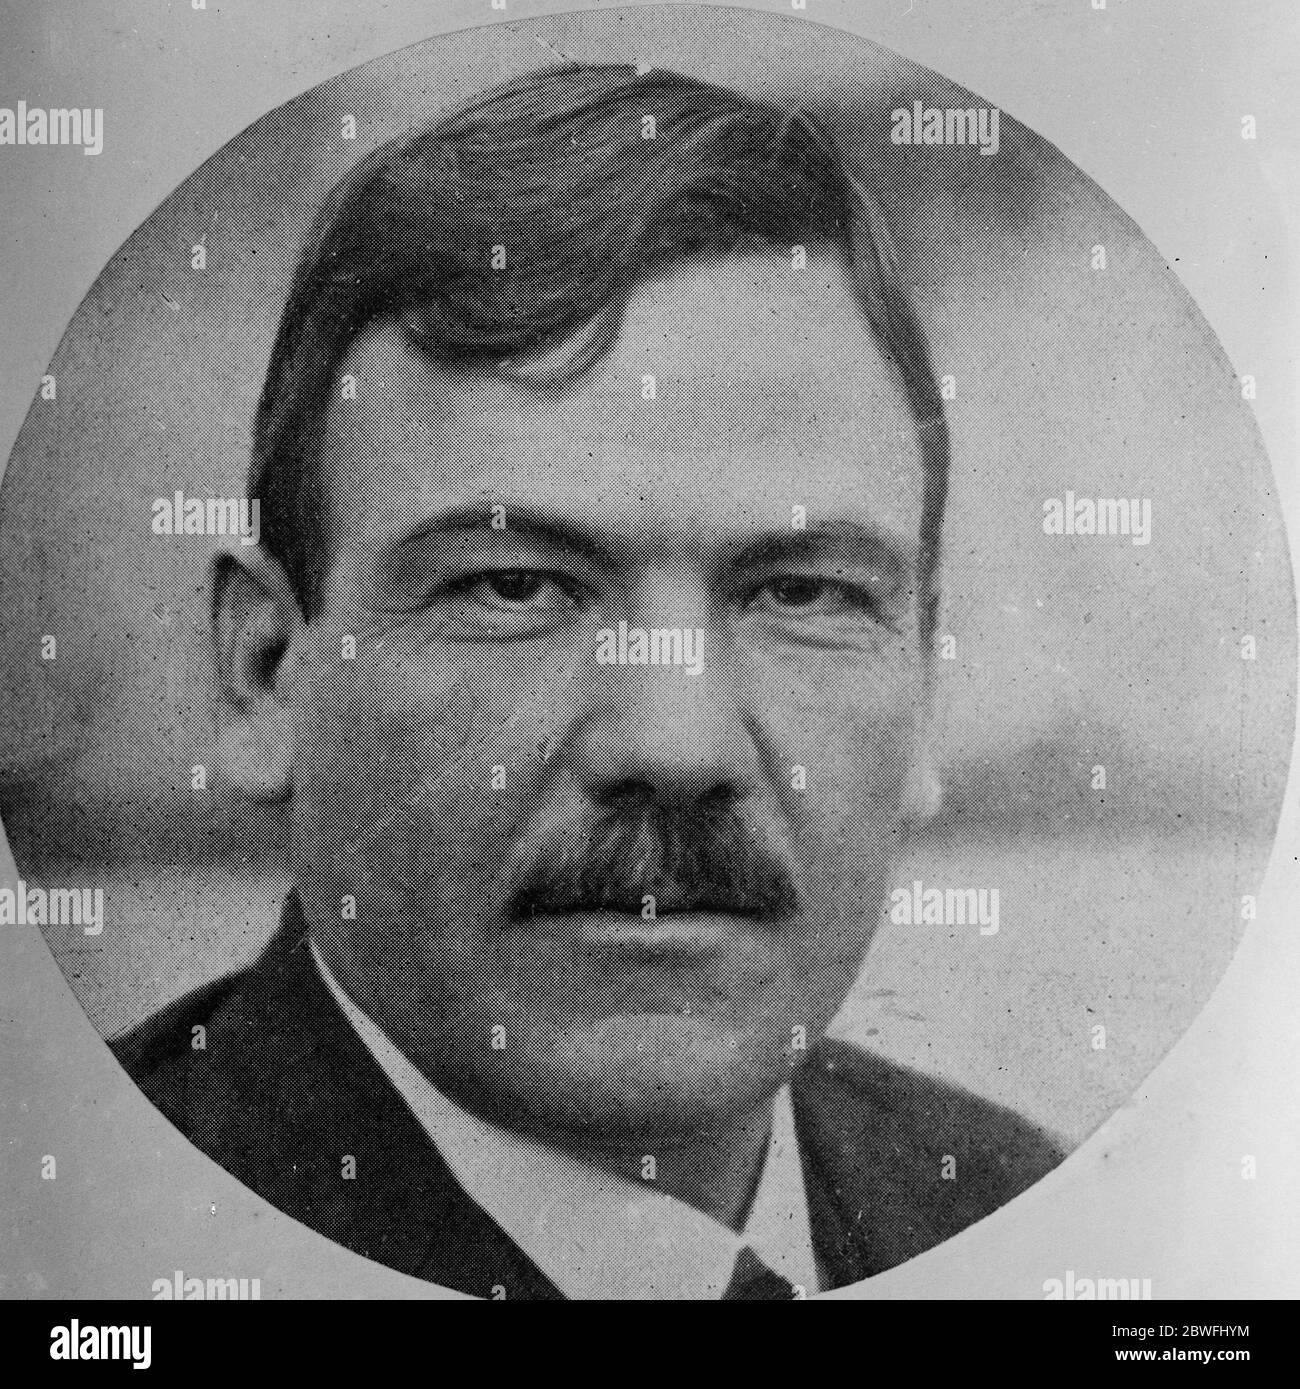 Mexico 's new President . A new portrait of General Plutarco Elias Calles , Mexico ' s new President . 14 January 1925 Stock Photo